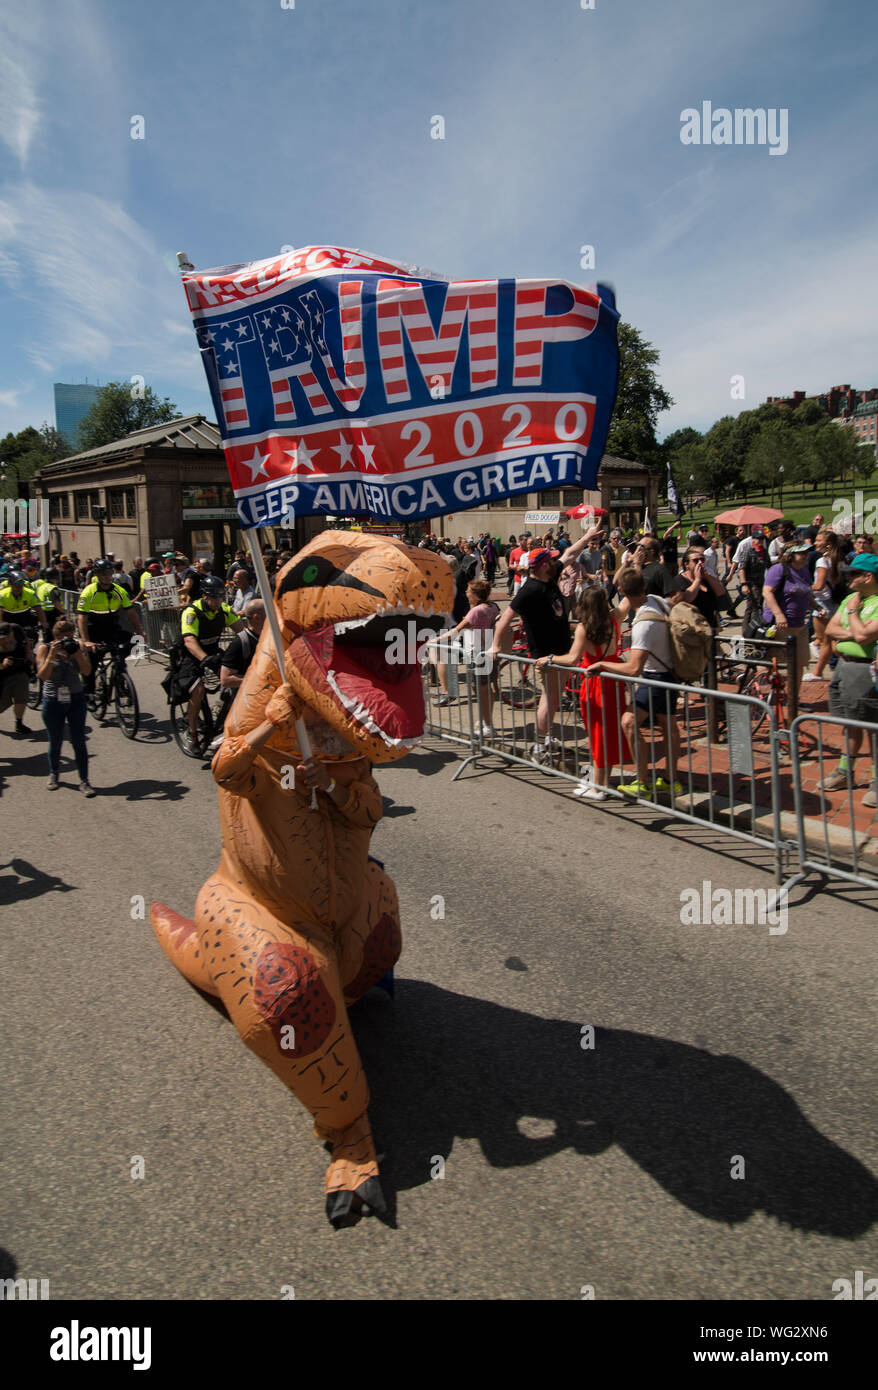 Boston, MA, USA.  31st August 2019.  Hundreds march in the Straight Pride Parade through Boston, MA.  The marchers, supporters of U.S. President Donald Trump, were outnumbered by anti-Trump and gay rights supporters. The Straight Pride march was organized by the newly formed “Super Happy Fun America”, who organized the Boston event as a response to gay pride parades that have been held in most major U.S, cities. Photo shows a man dressed as a dinosaur carrying a Trump 2020 on Boylston Street at the start of the parade. Credit Chuck Nacke / Alamy Live News Stock Photo